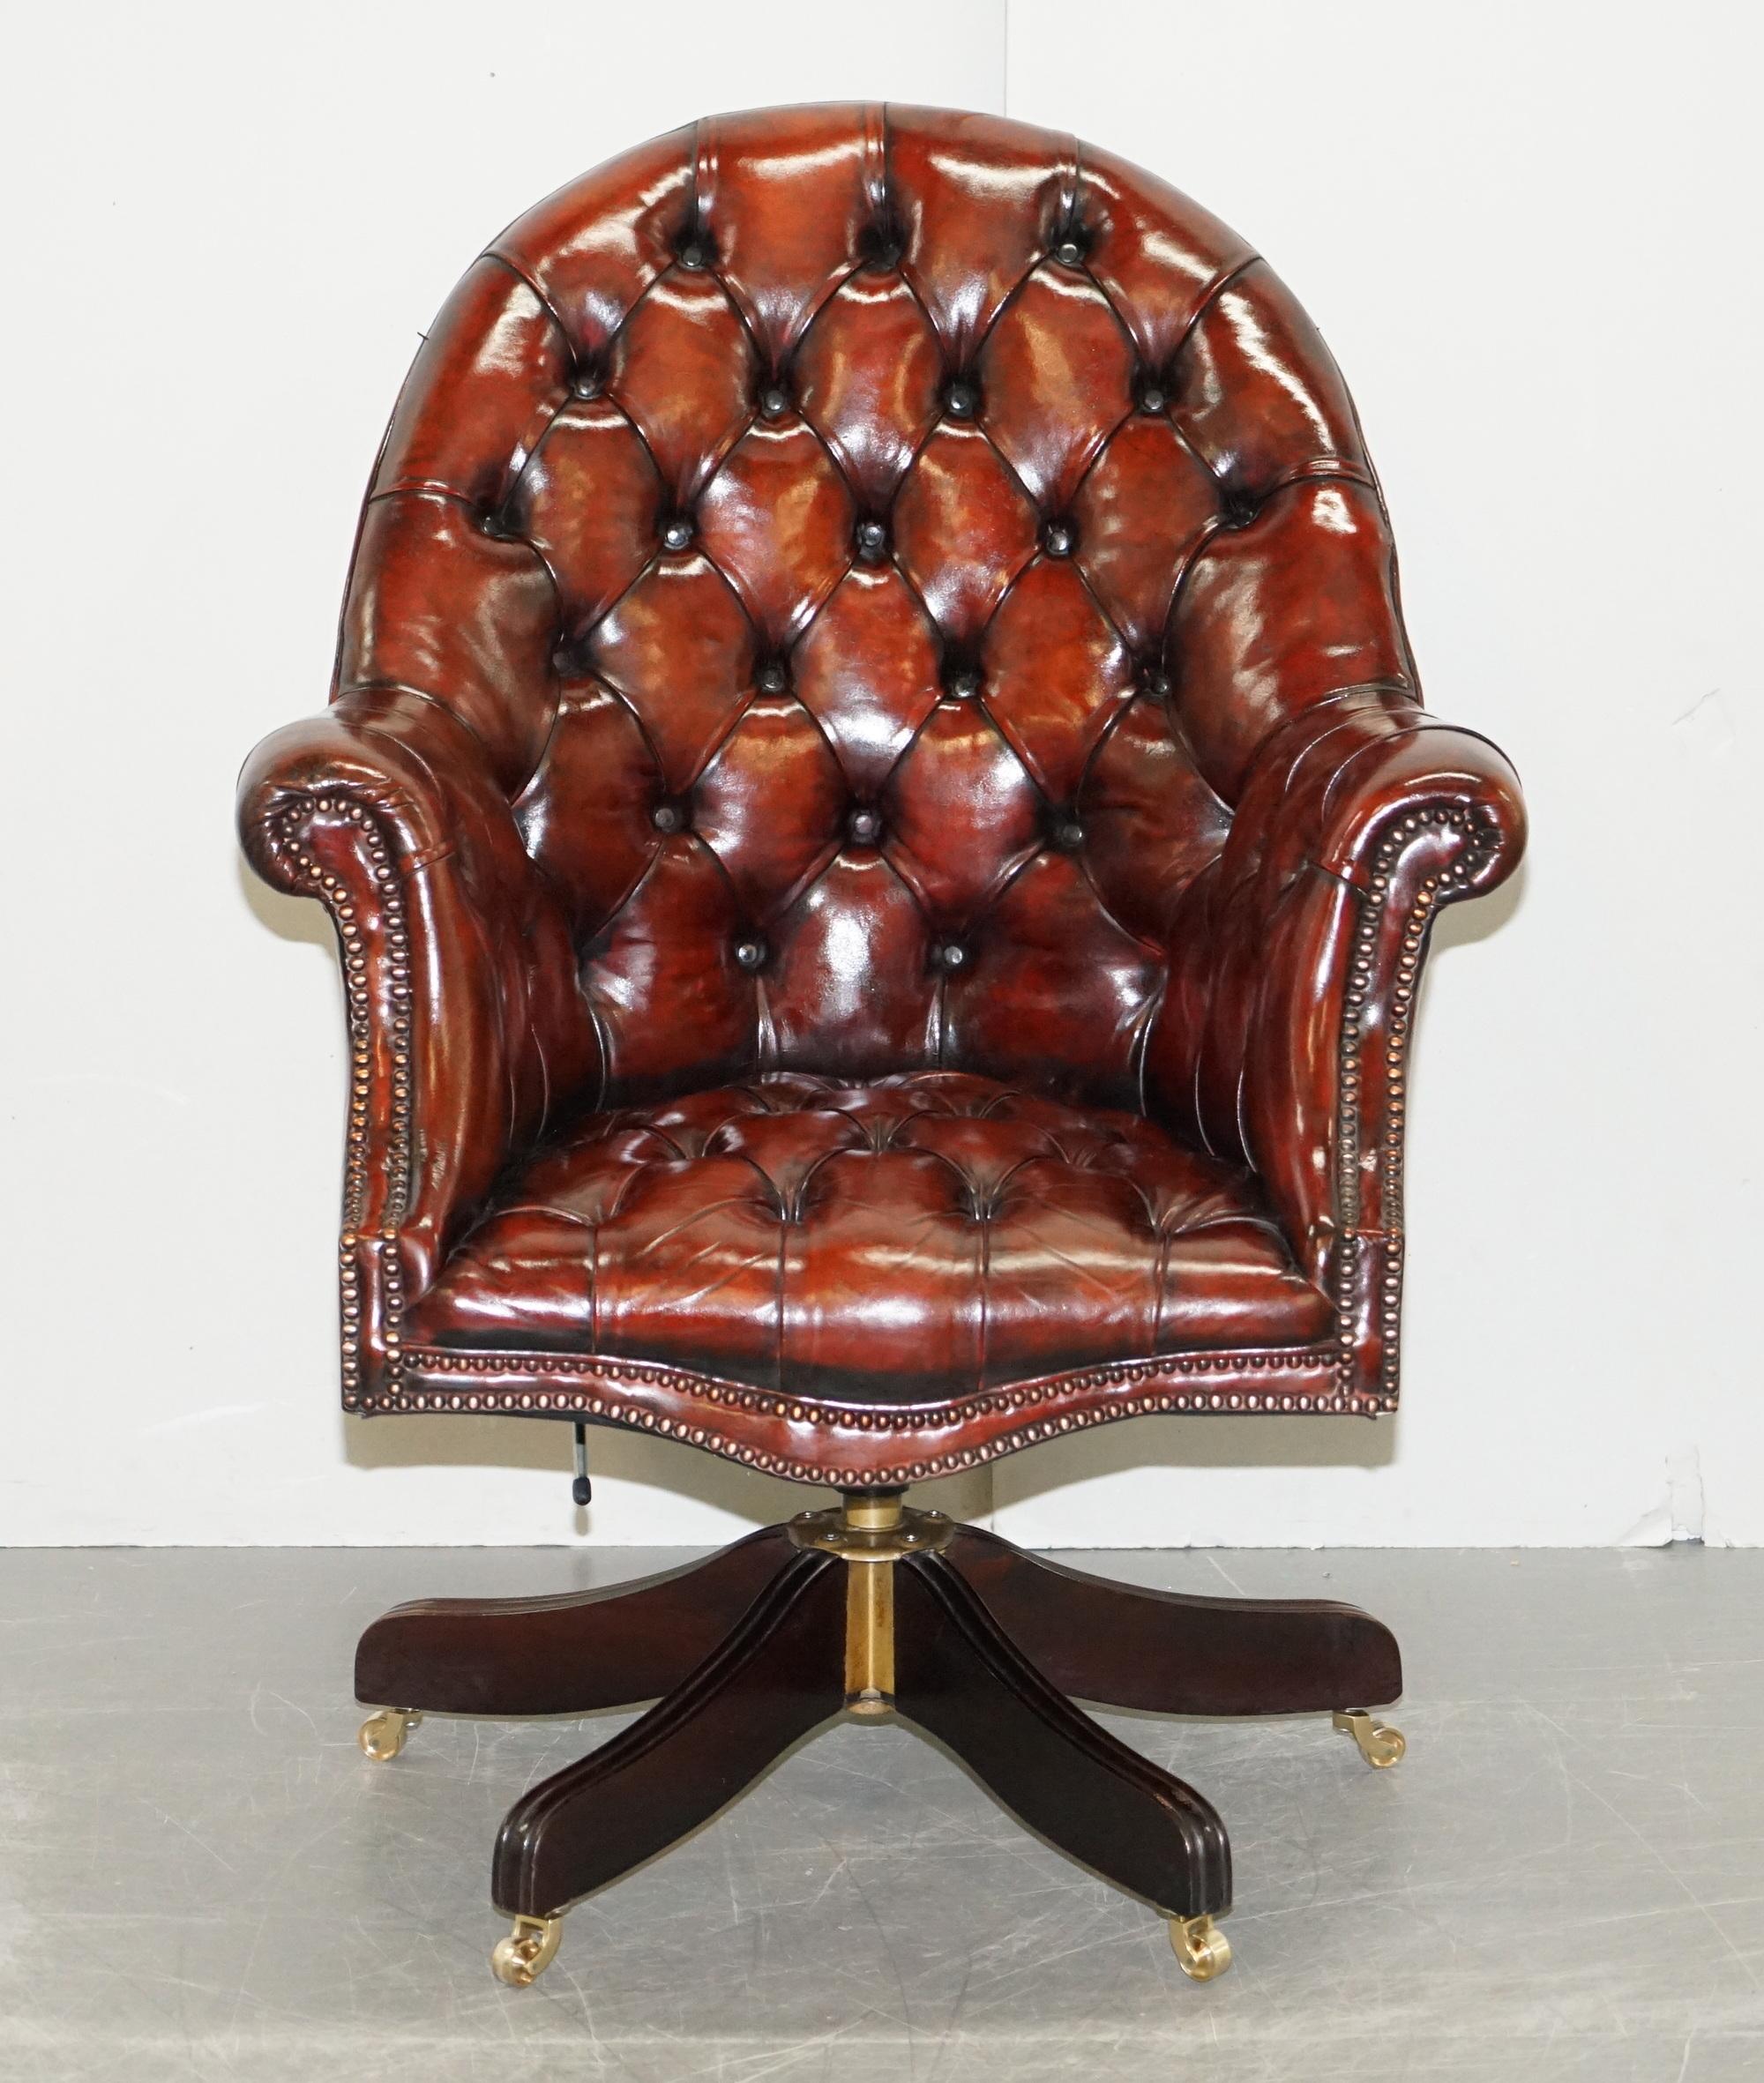 We are delighted to offer this lovely fully restored original vintage hand dyed Mmahogany brown leather Chesterfield tufted directors chair

A very good looking well made and comfortable directors chair. Its chesterfield buttoned both back and